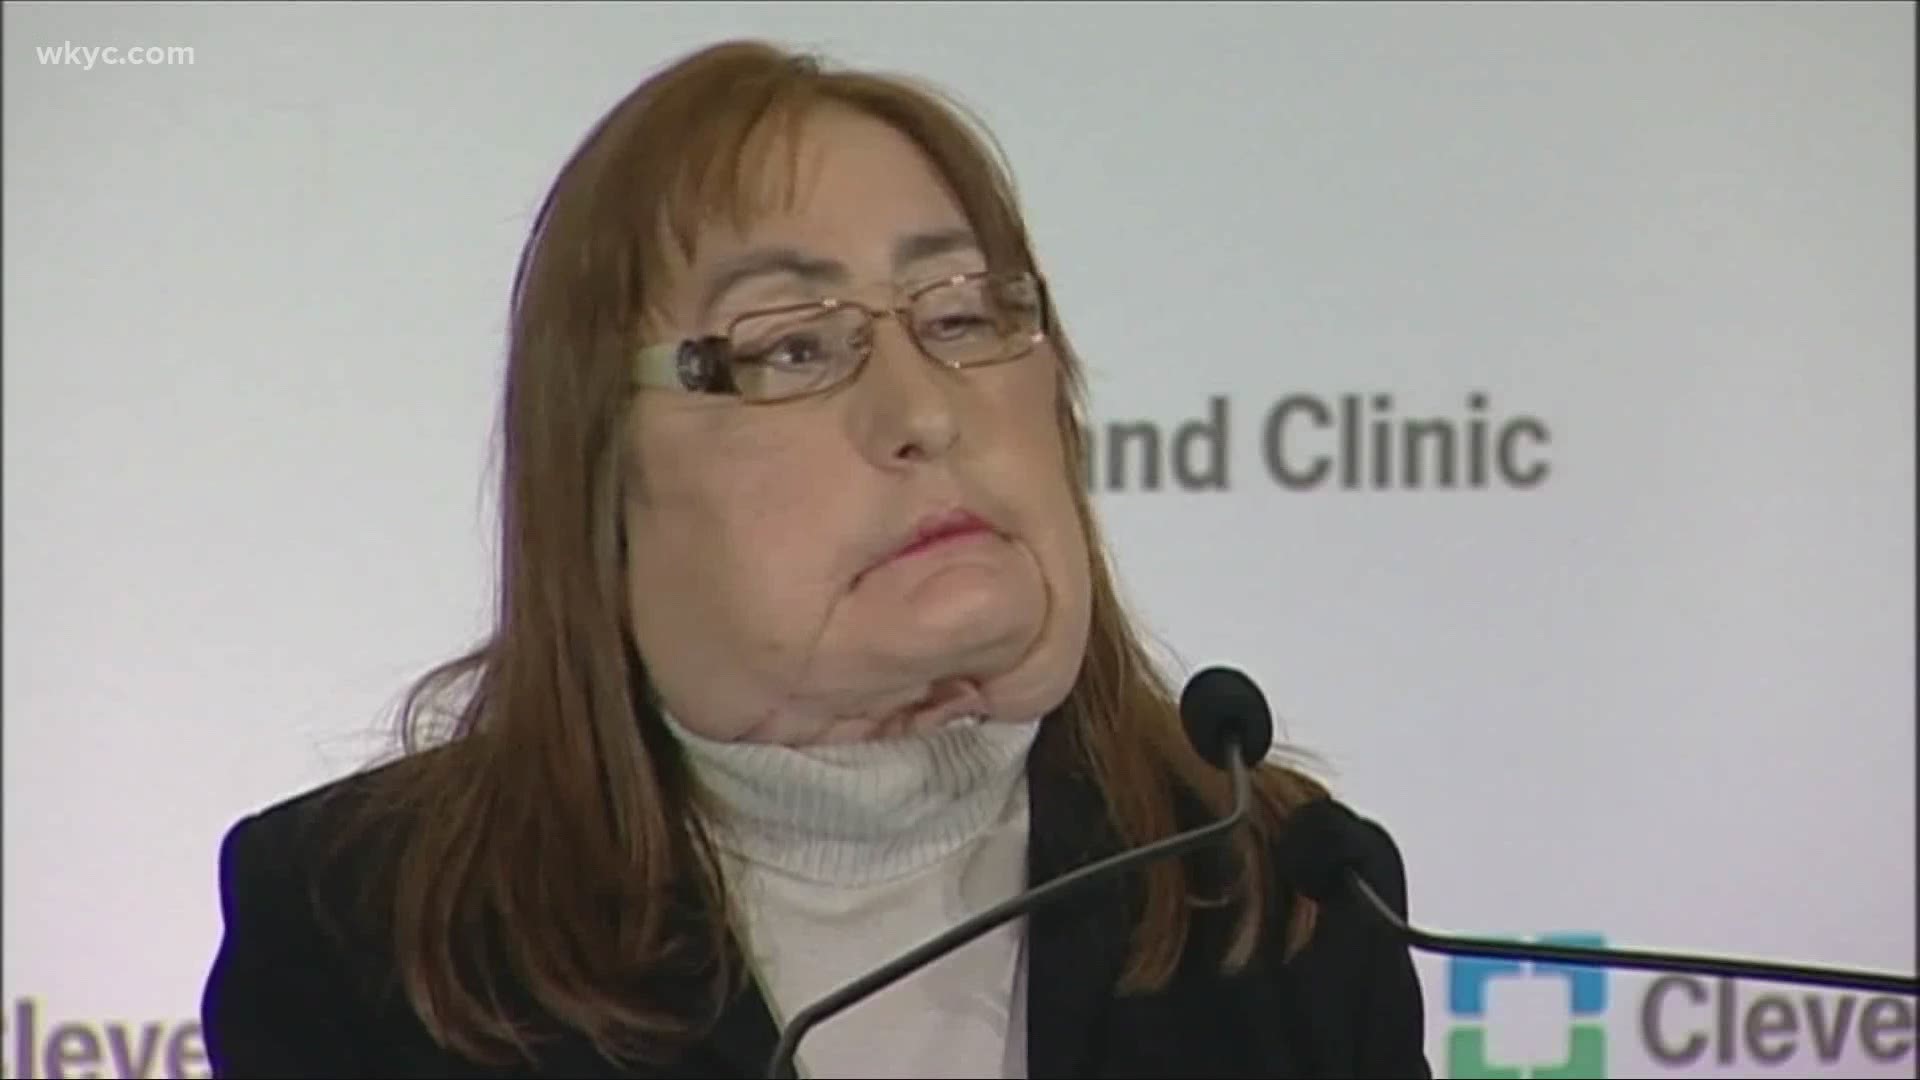 Culp died on Thursday at the age of 57. She received the face transplant in 2008.